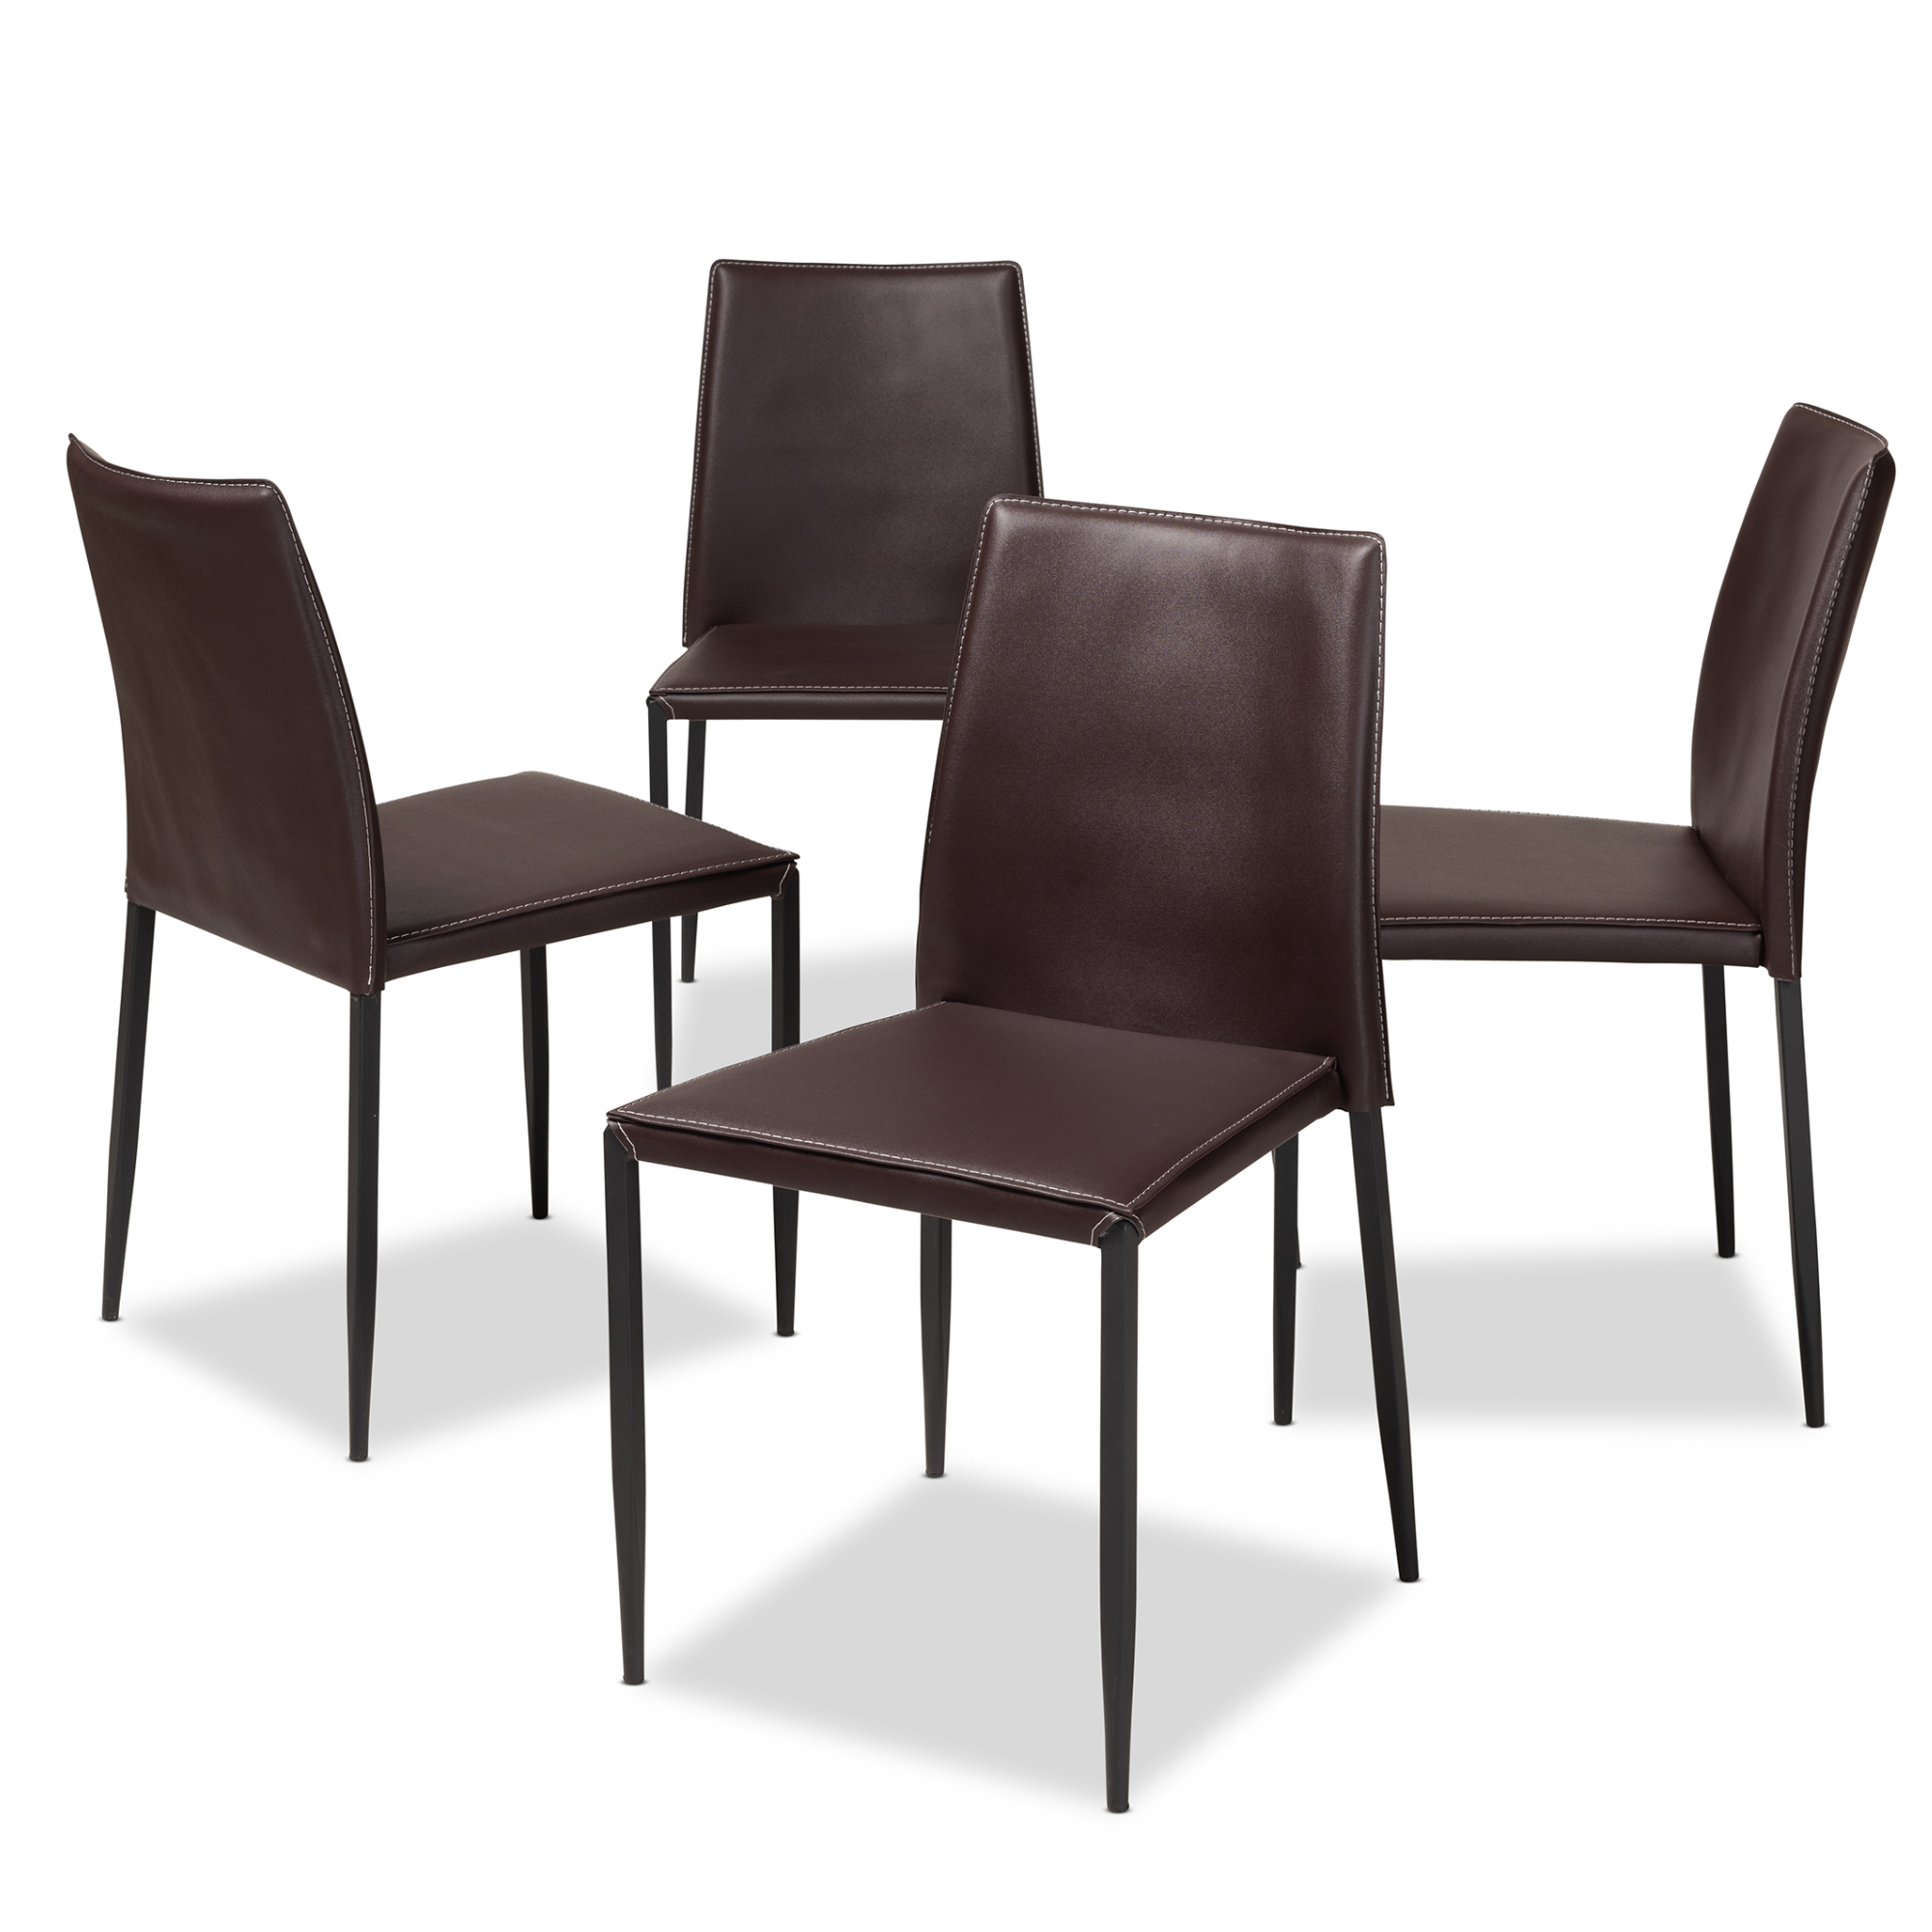 Brown Baxton Furniture Studios Rossi Bonded Leather Dining Chair Set of 2 Wholesale Interiors ALC-1083-Brown 